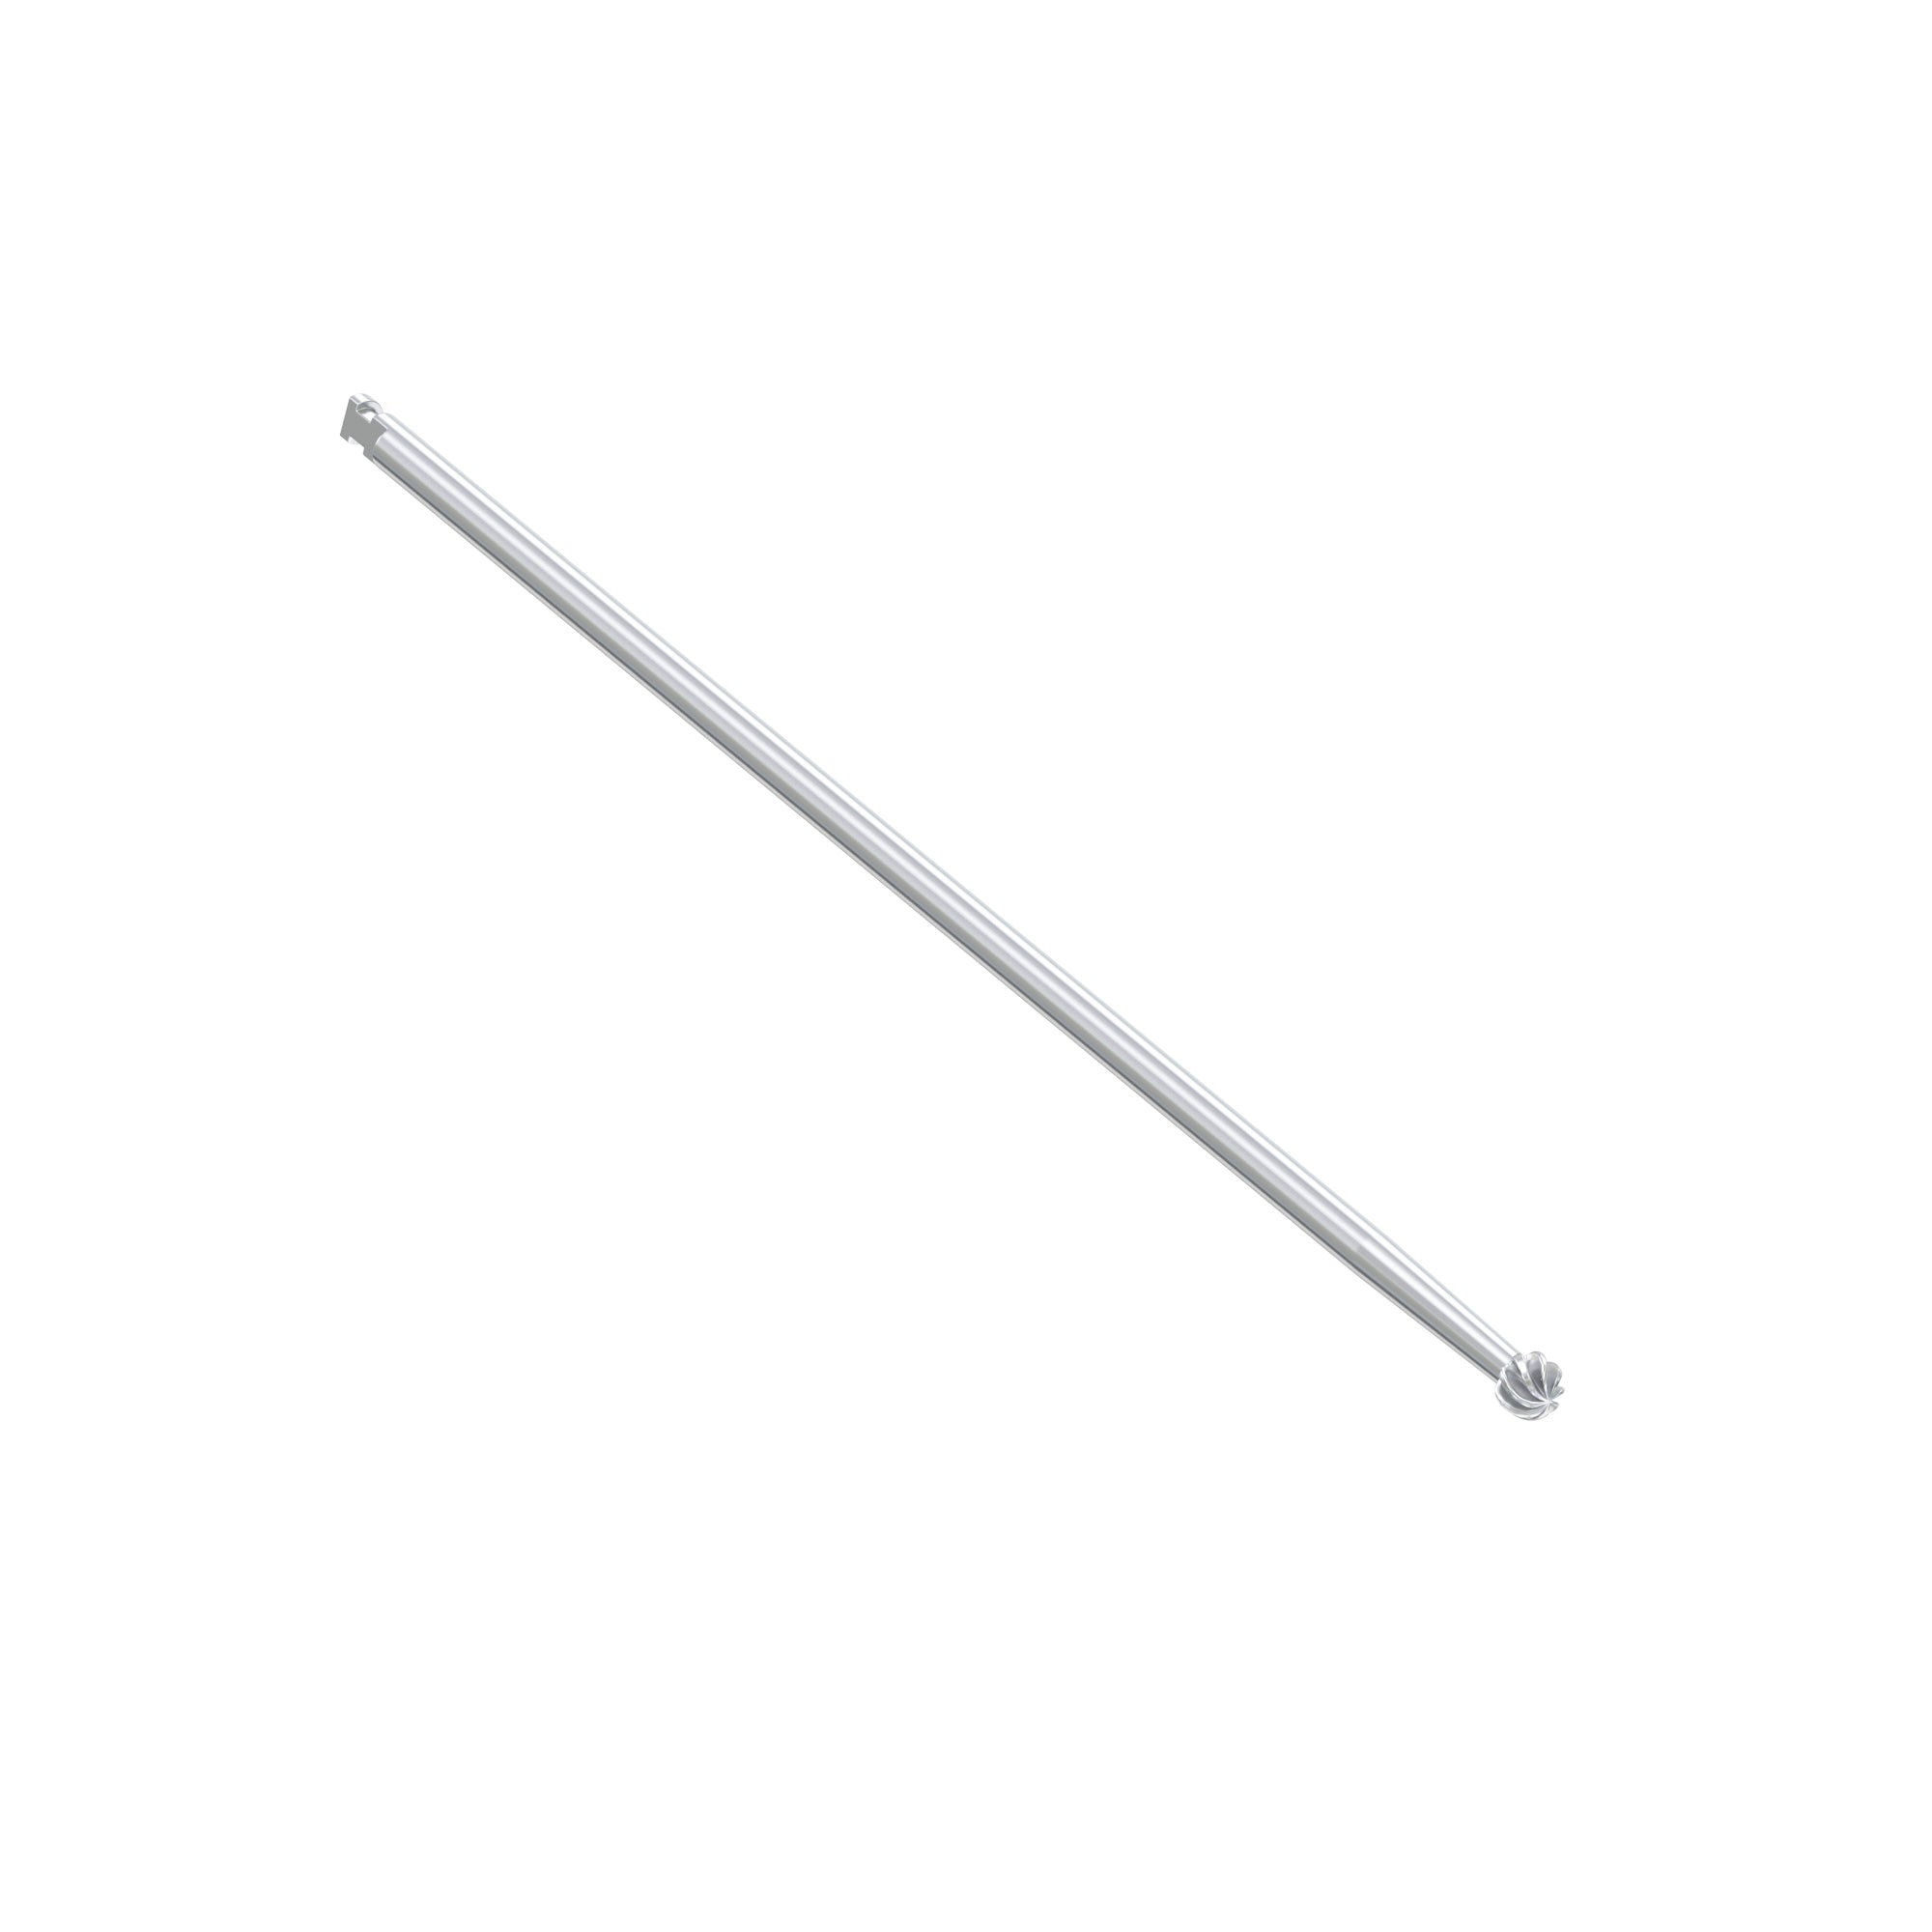 DSI Surgical Long Pilot Drill 70mm For Zygomatic Implant Socket Preparation